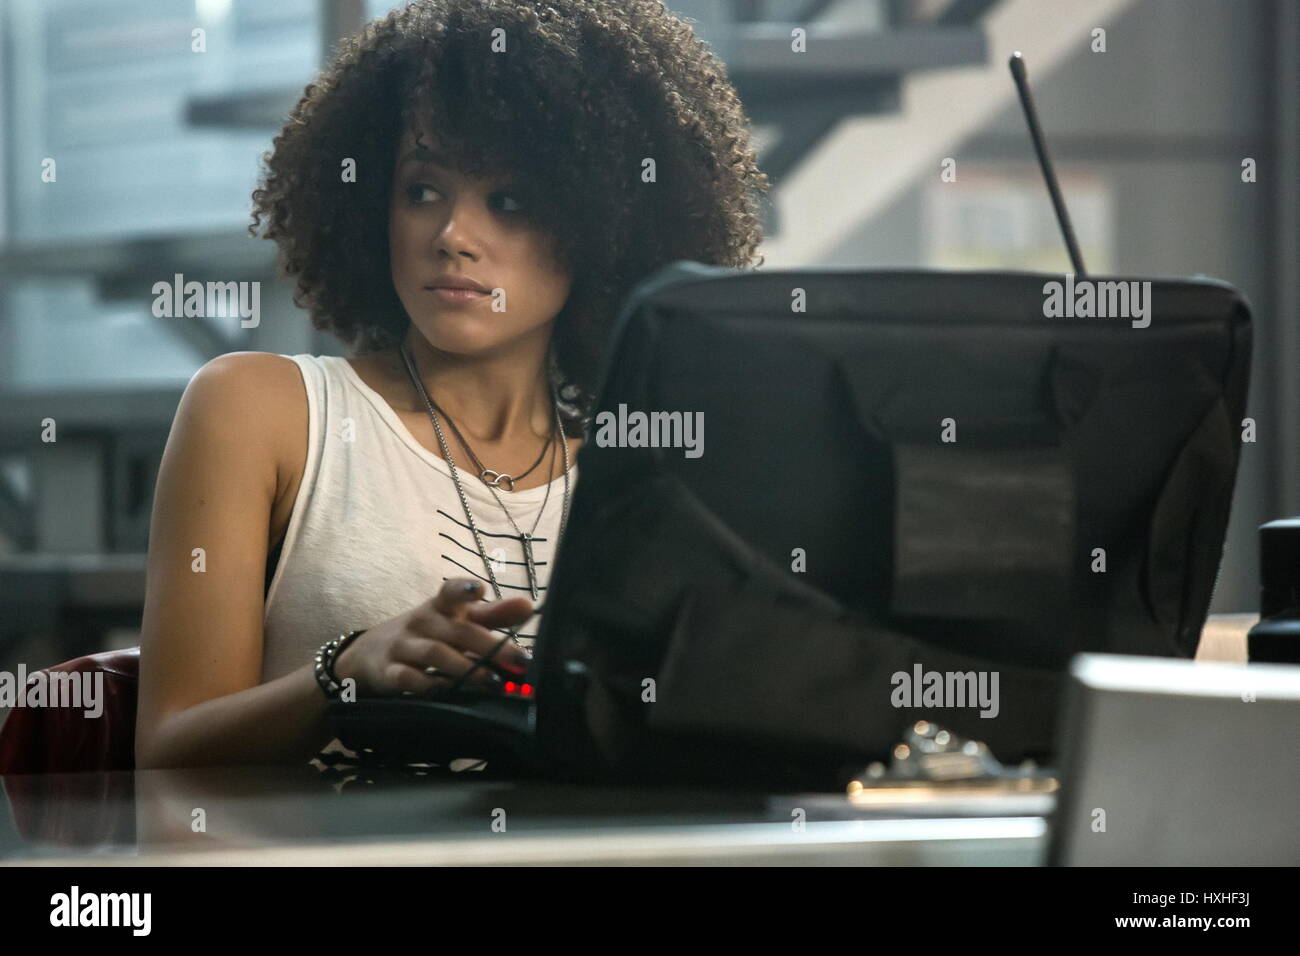 RELEASE DATE: April 14, 2017 TITLE: The Fate of the Furious STUDIO: Universal Pictures DIRECTOR: F. Gary Gray PLOT: When a mysterious woman seduces Dom into the world of crime and a betrayal of those closest to him, the crew face trials that will test them as never before PICTURED: Nathalie Emmanuel as Ramsey. (Credit Image: © Universal Pictures/Entertainment Pictures/ZUMAPRESS.com) Stock Photo